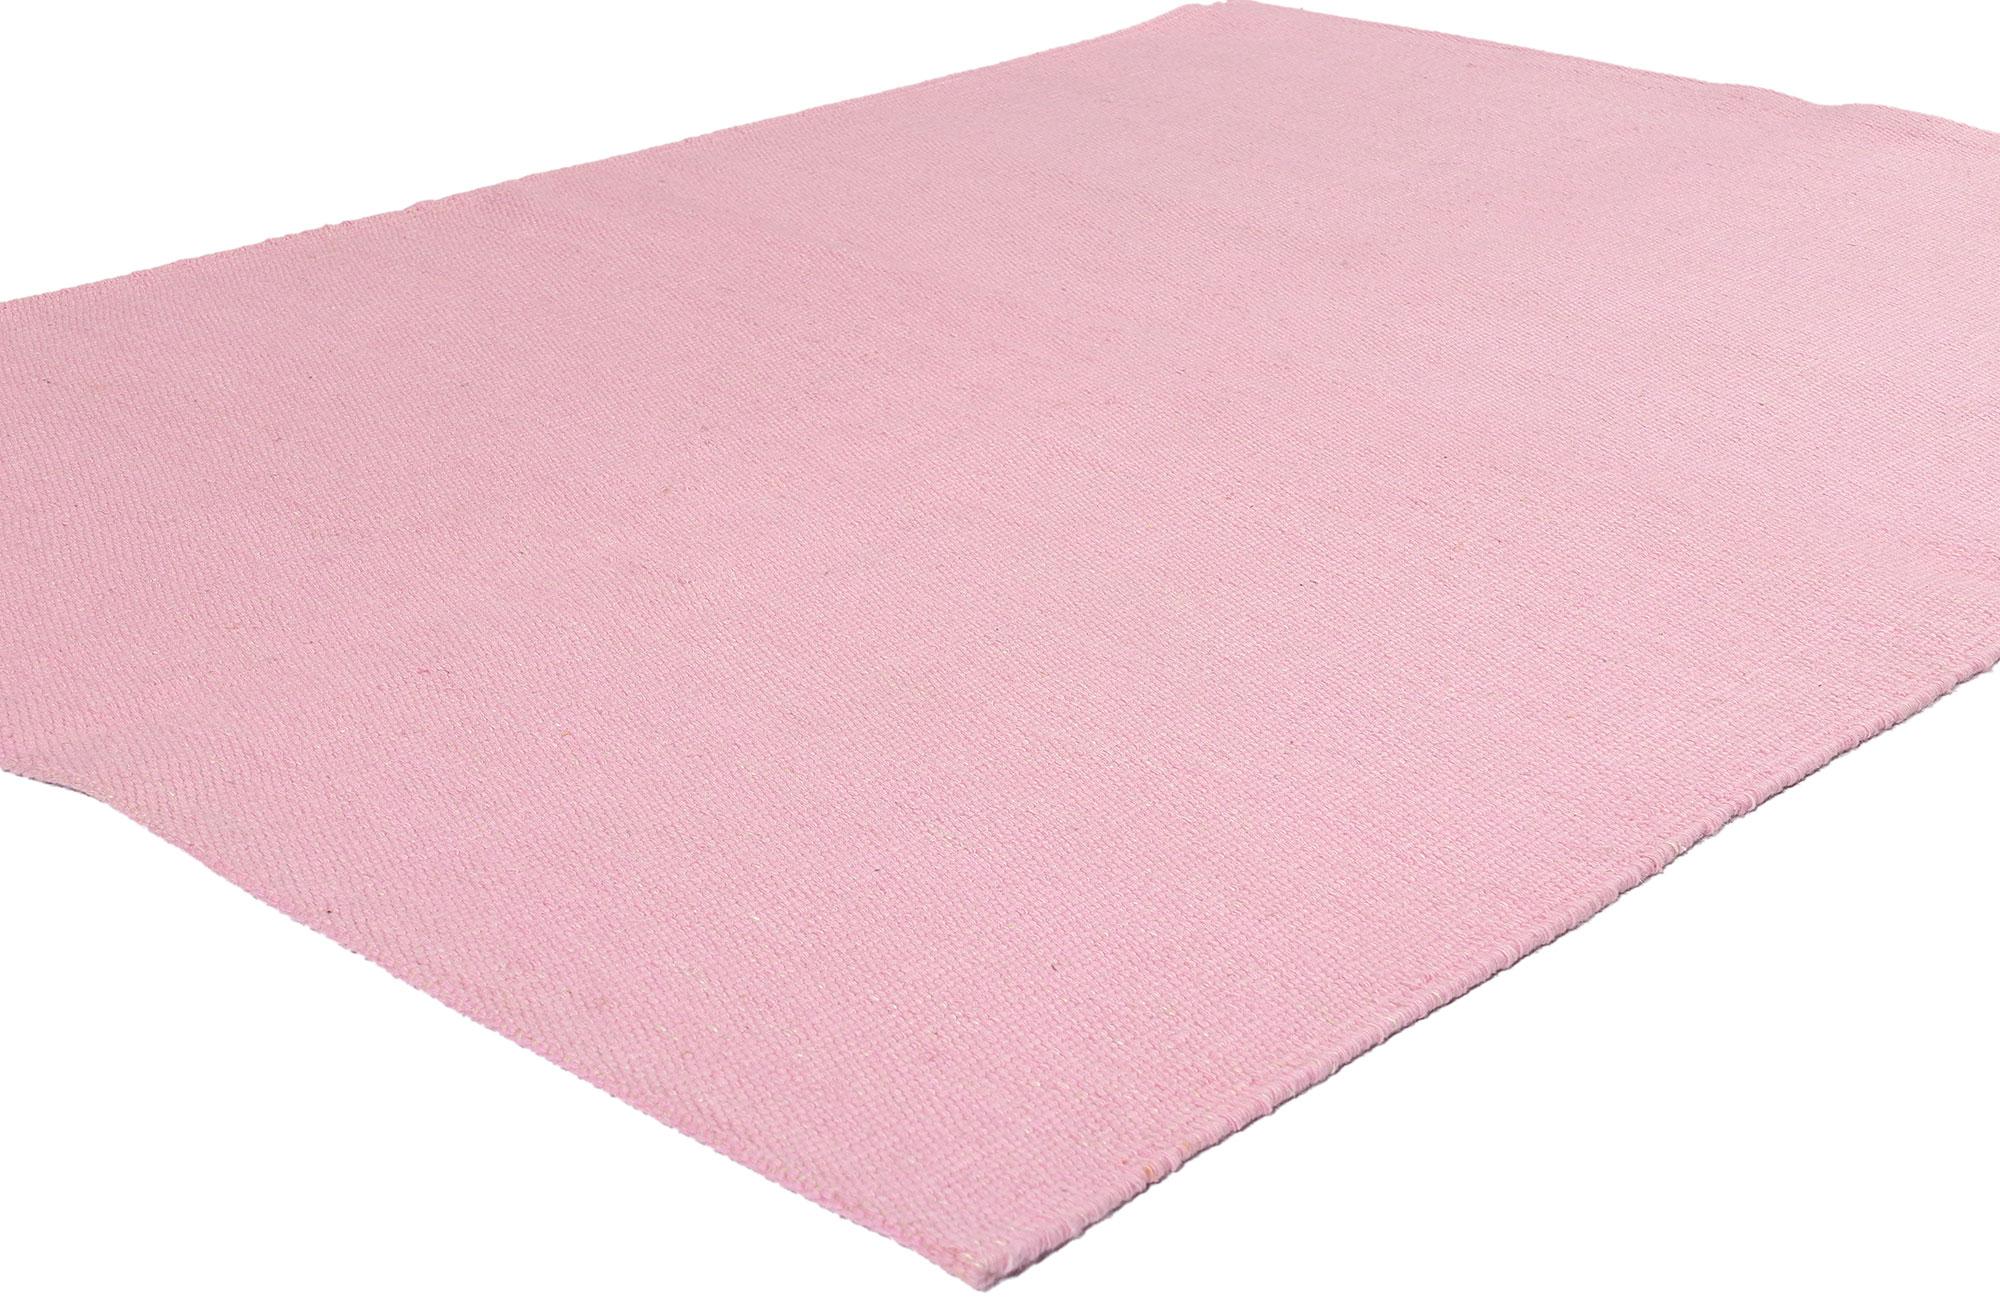 30688 Scandinavian Modern Swedish Inspired Pink Kilim Rug, 05'00 x 06'10. Swedish-style kilim rugs, meticulously crafted in India, seamlessly marry the classic aesthetics of Swedish design with the esteemed craftsmanship of Indian rug making.